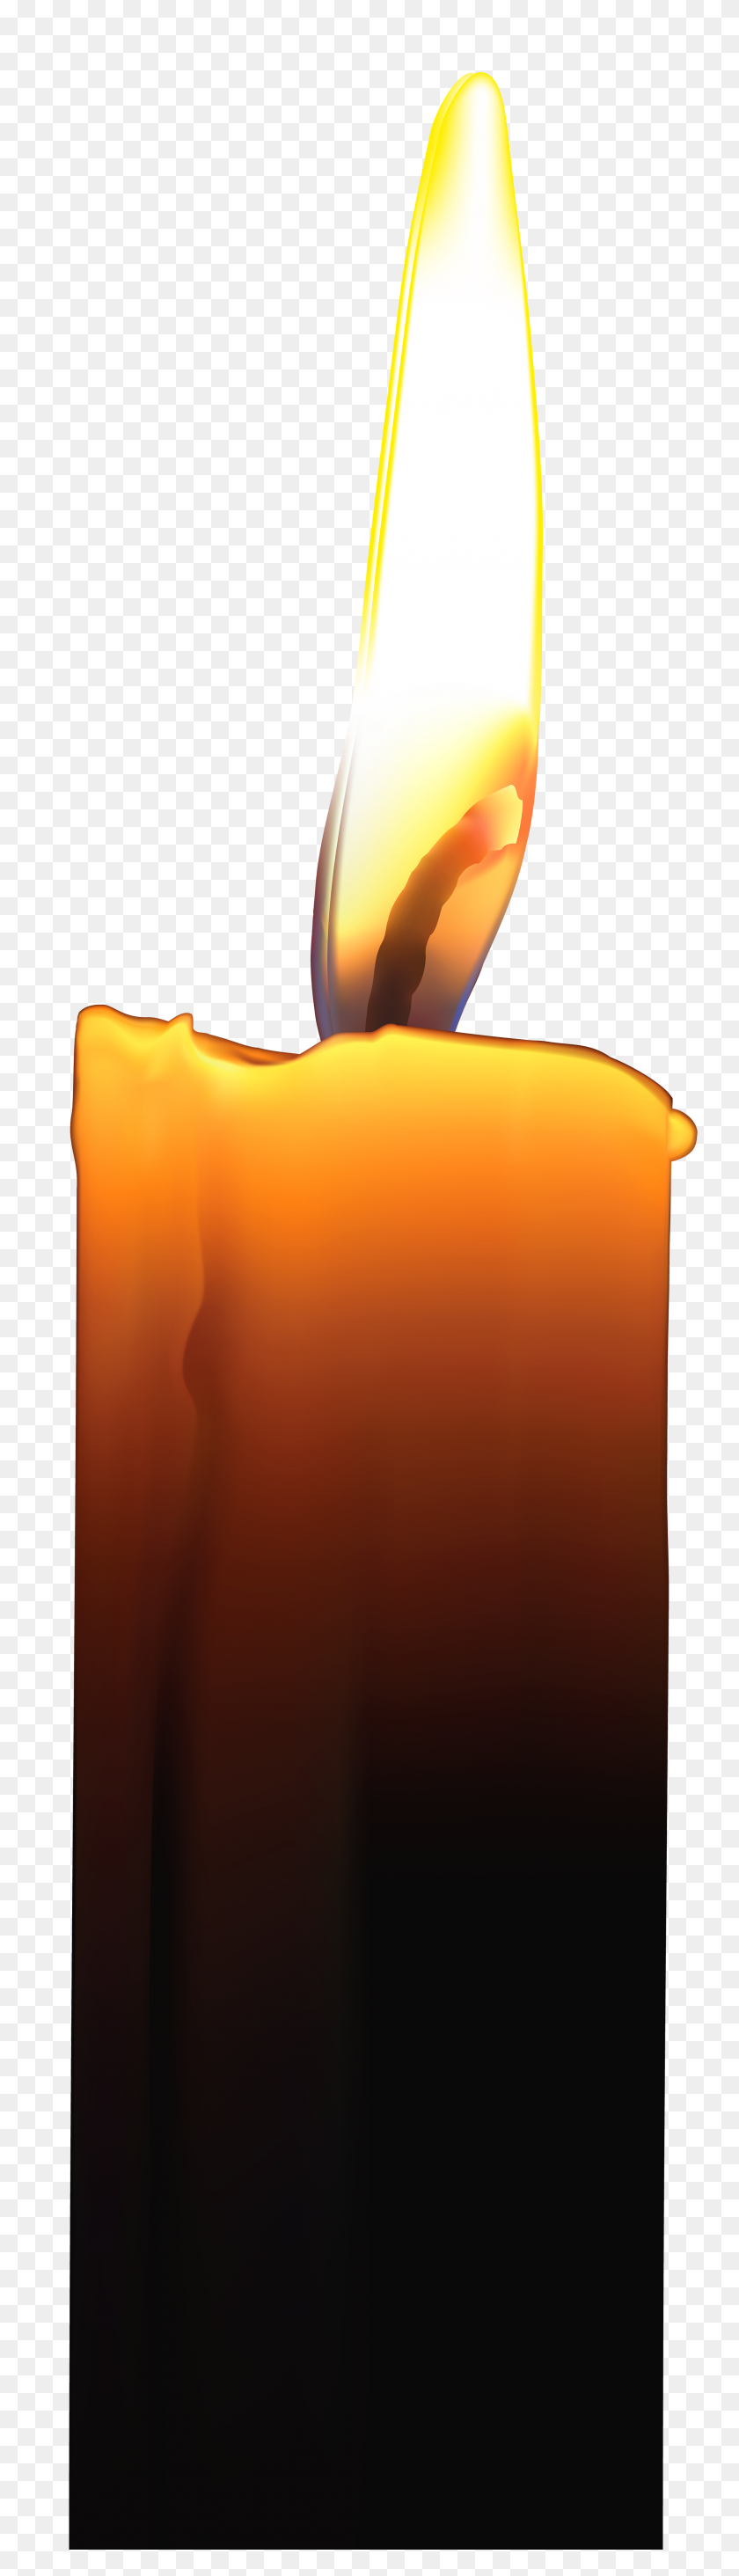 2175x8000 Memorial Candle Png Clip Art Image - Funeral Clipart